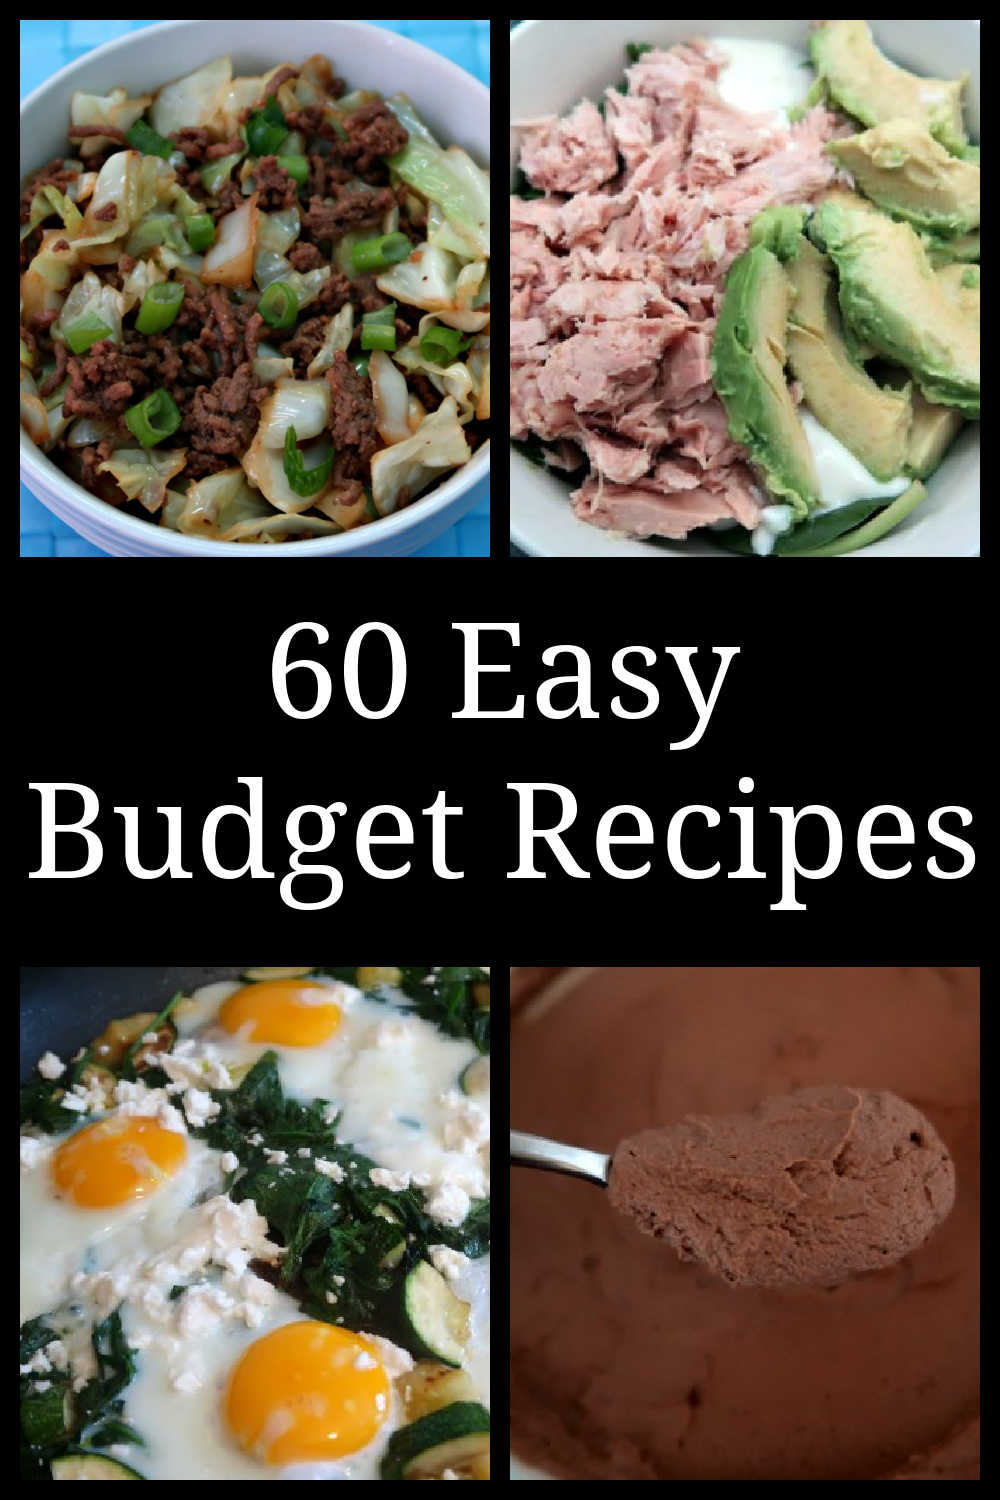 Budget Recipes - 60+ Ideas for cheap meals including easy healthy breakfast, lunch, dinner, snacks and desserts with low budget, super frugal ingredients.